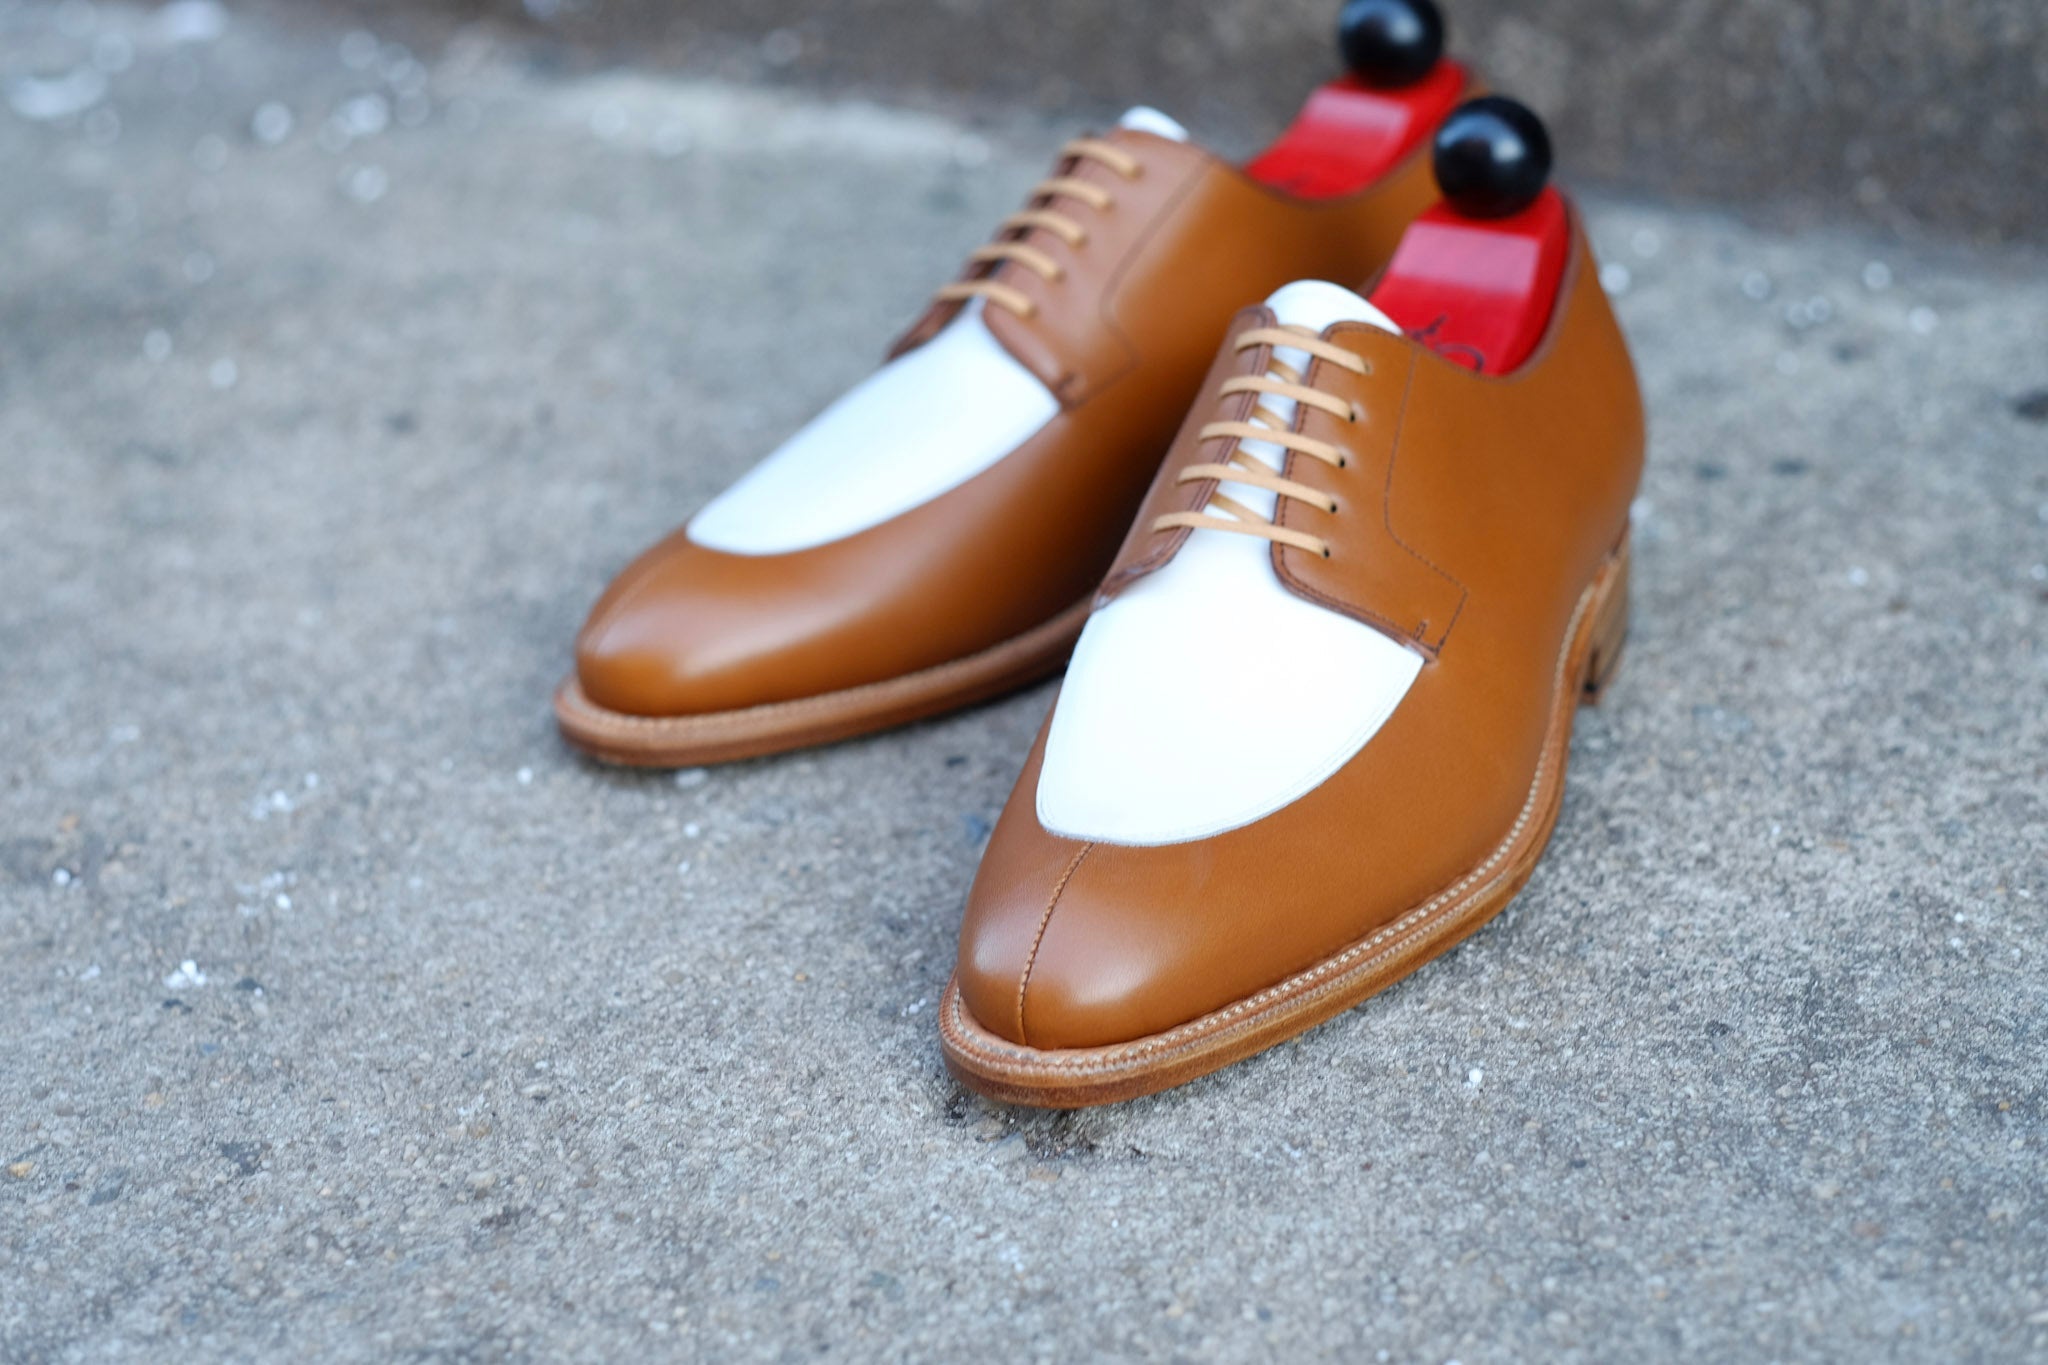 Belltown MTO - Maple Calf / White Calf - NGT Last- Single Leather Sole